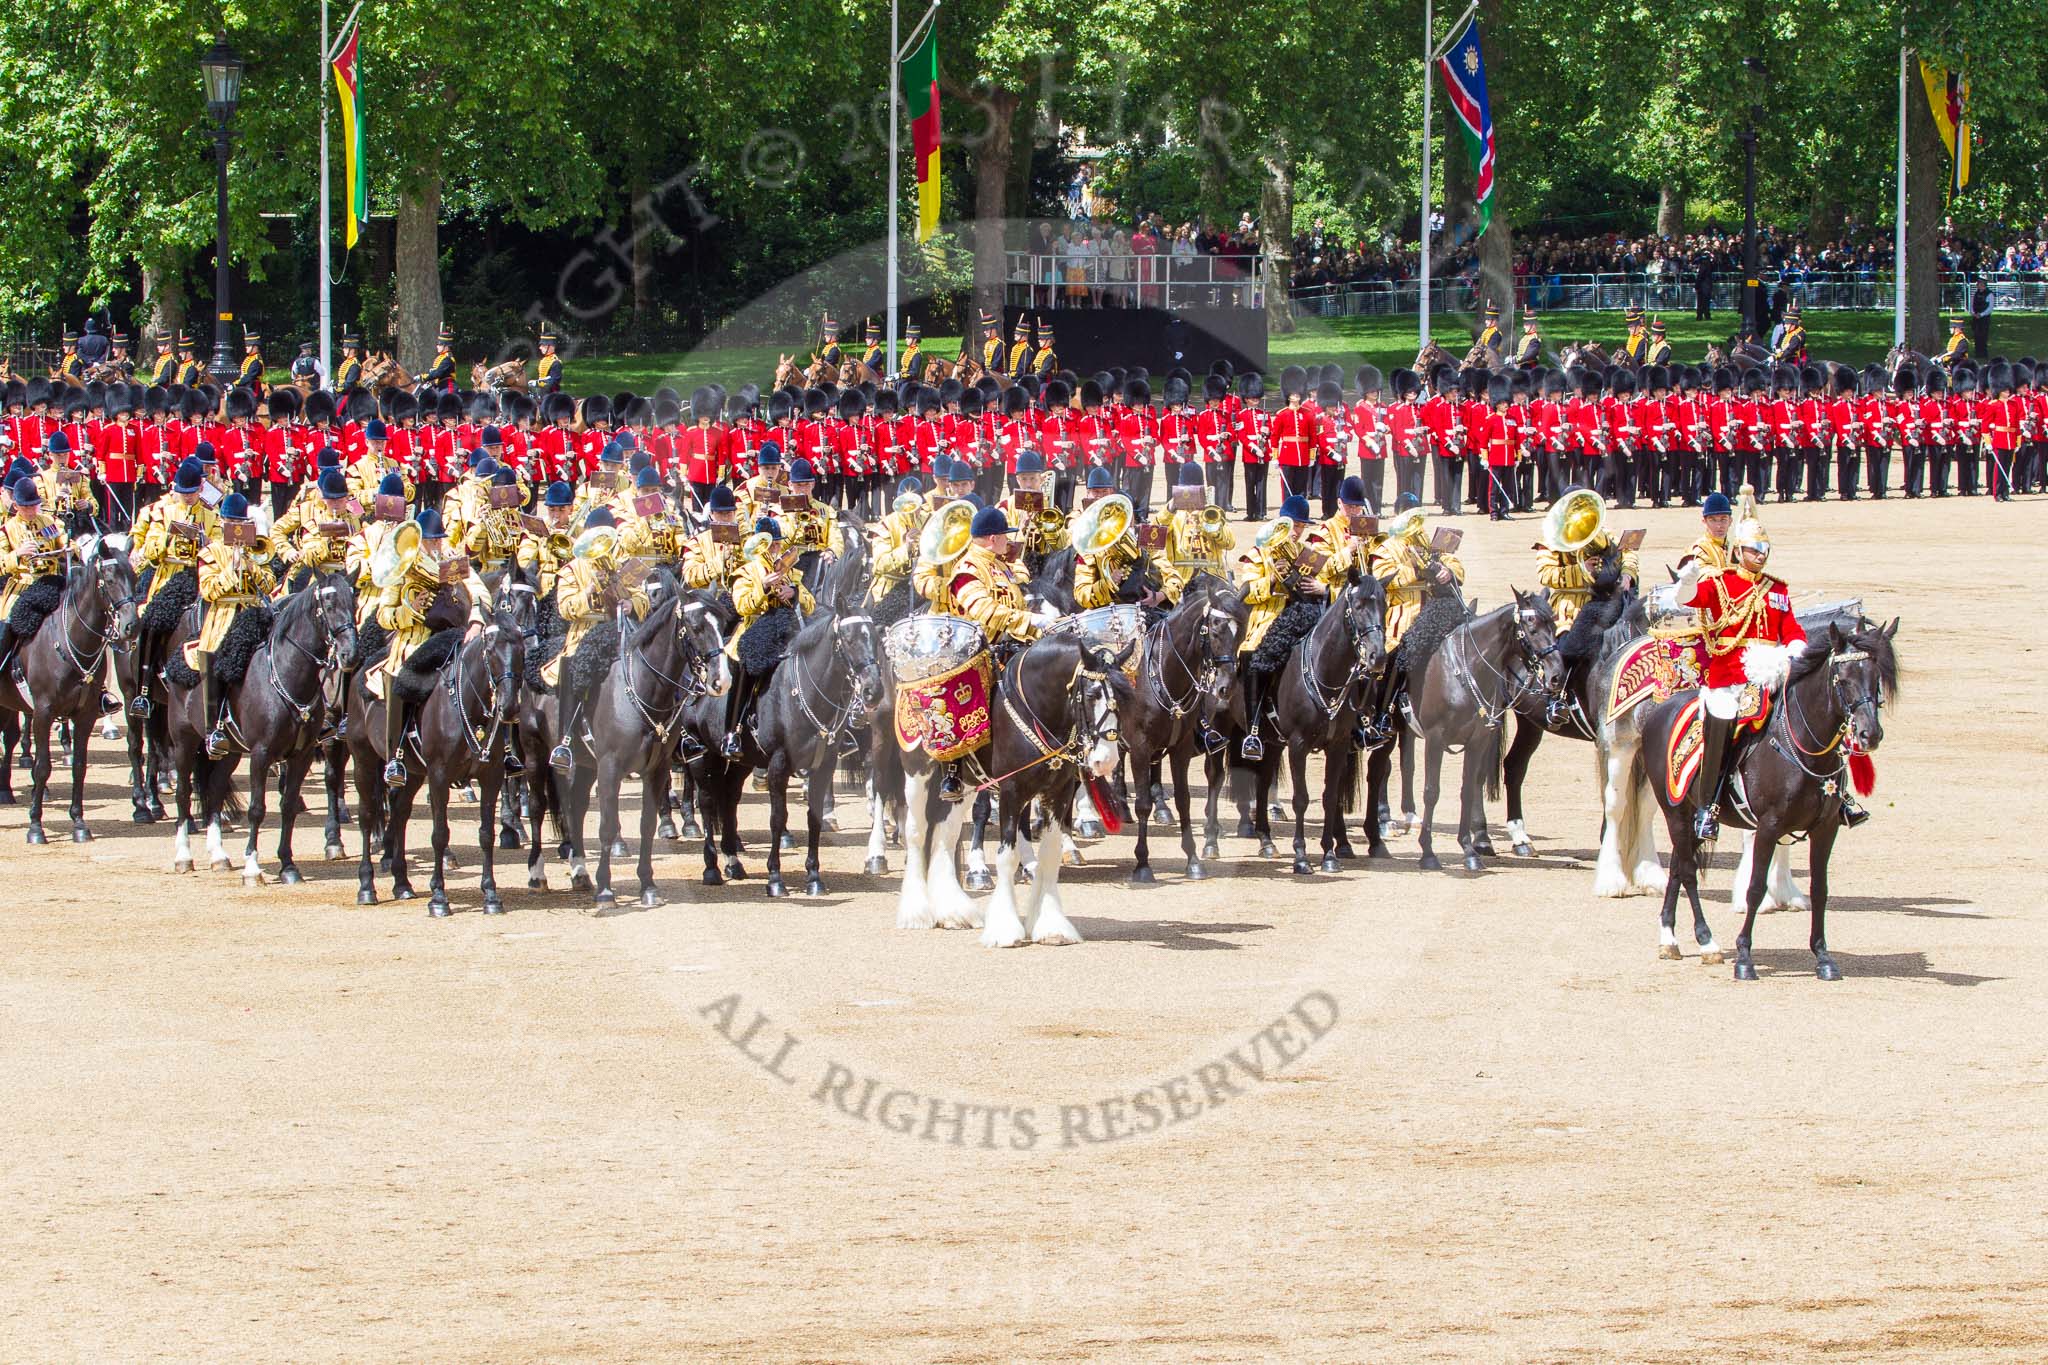 Trooping the Colour 2013: The Mounted Bands of the Household Cavalry during the Ride Past. Image #707, 15 June 2013 11:56 Horse Guards Parade, London, UK